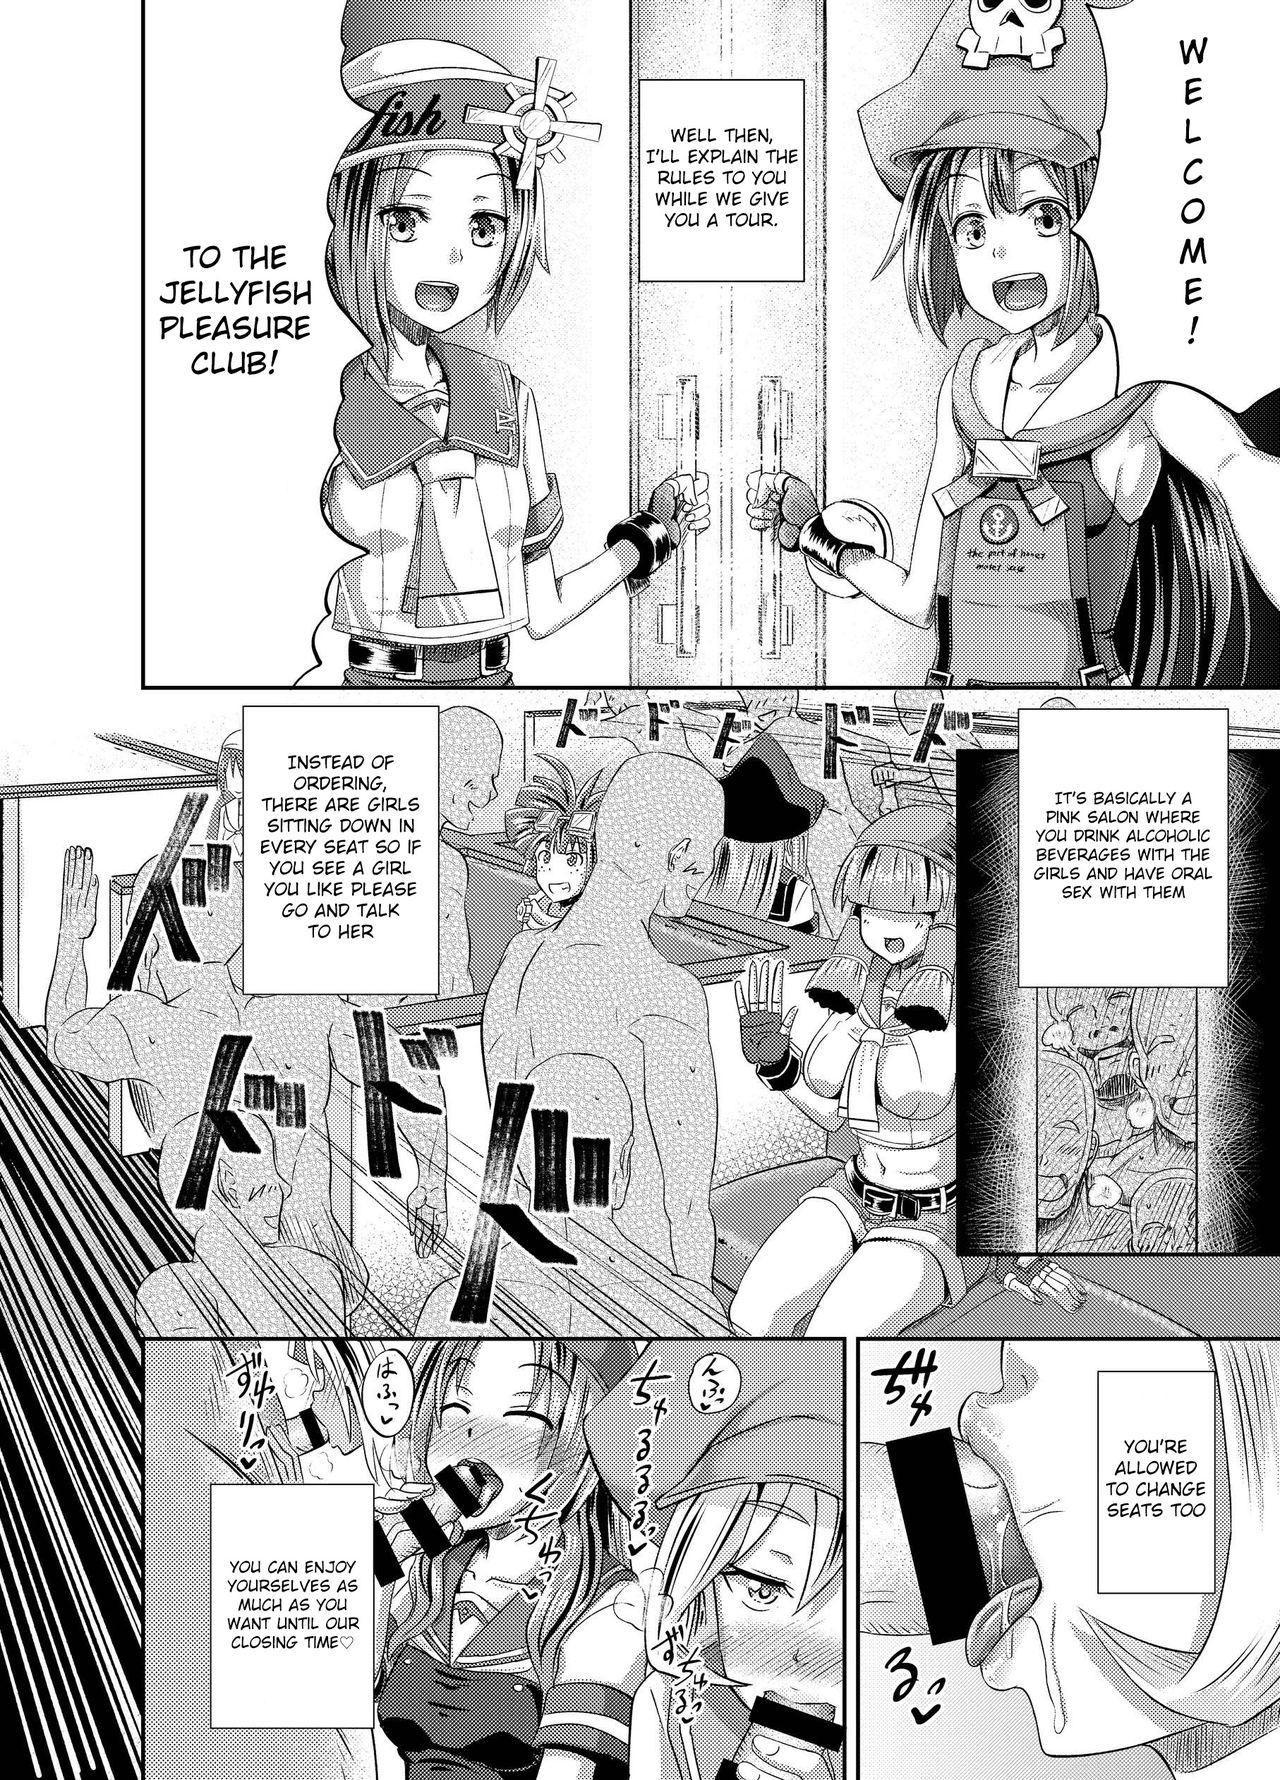 Amature Sex Jellyfish Kaizokudan e Youkoso! | Welcome to The Jellyfish Pleasure Club! - Guilty gear Butt - Page 3